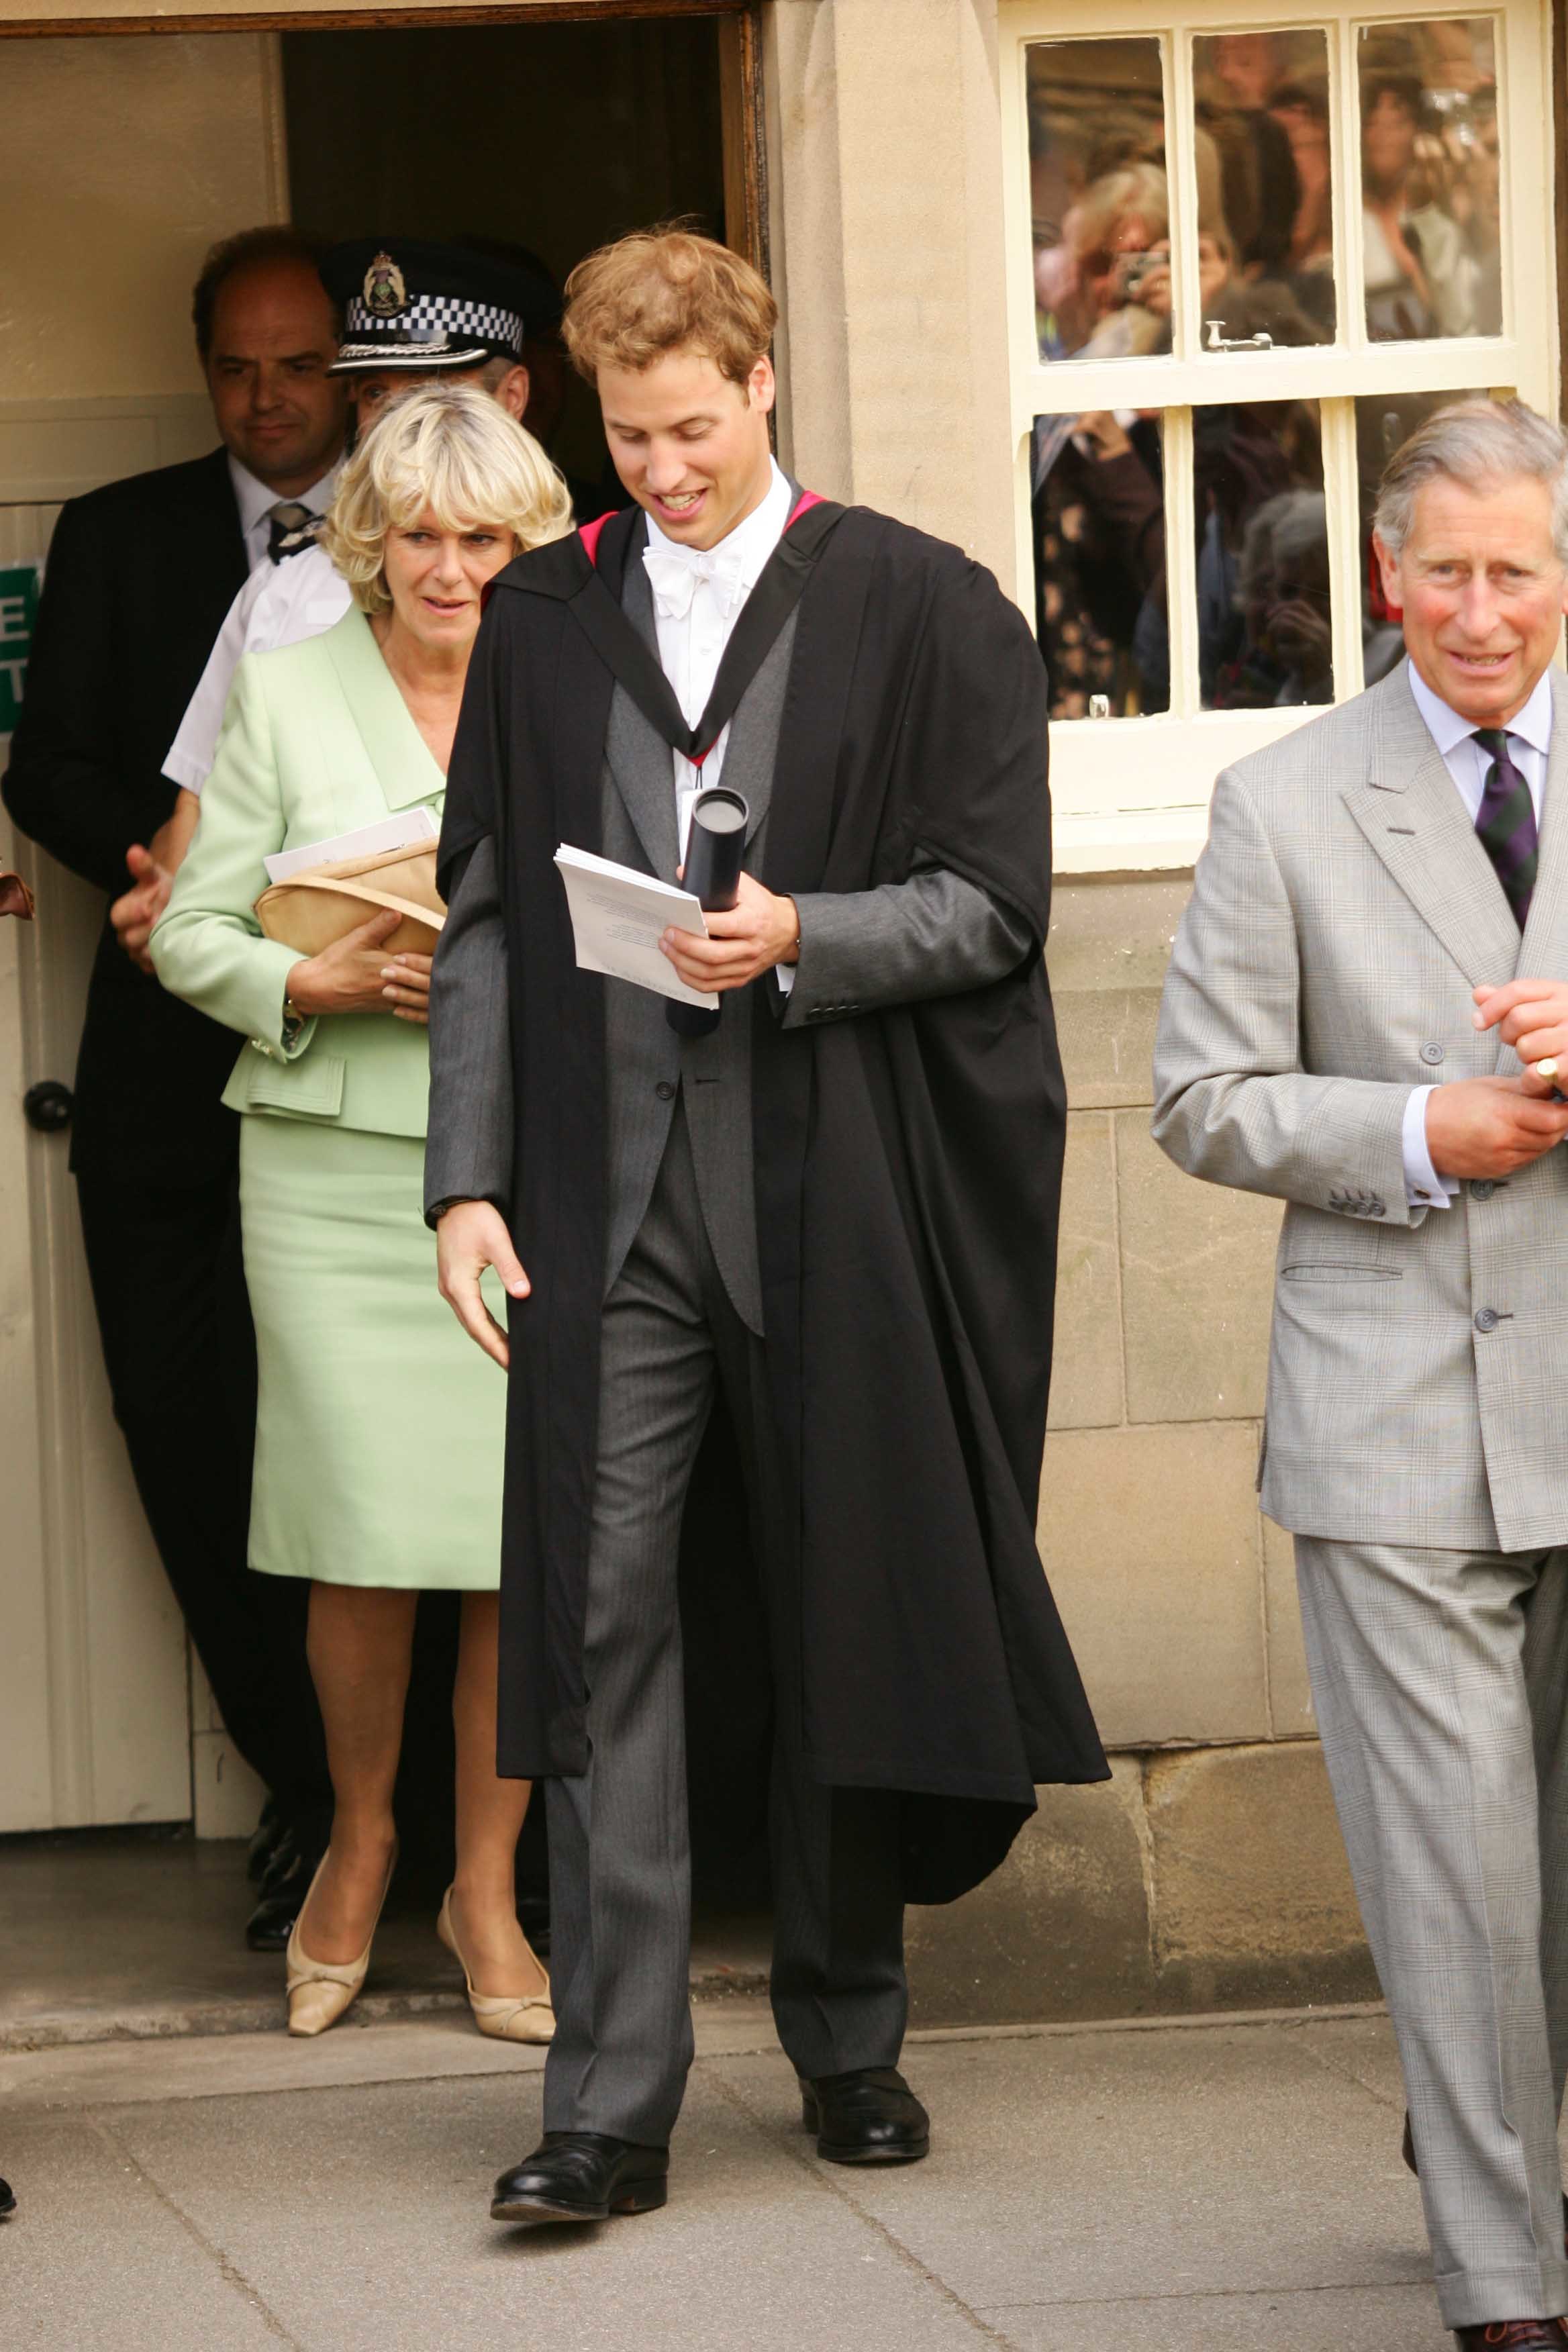 <p>A few months after he married Camilla, Duchess of Cornwall, Prince Charles brought his new bride to son <a href="https://www.wonderwall.com/celebrity/profiles/overview/prince-william-482.article">Prince William</a>'s graduation from the University of St. Andrews in Scotland on June 23, 2005.</p>